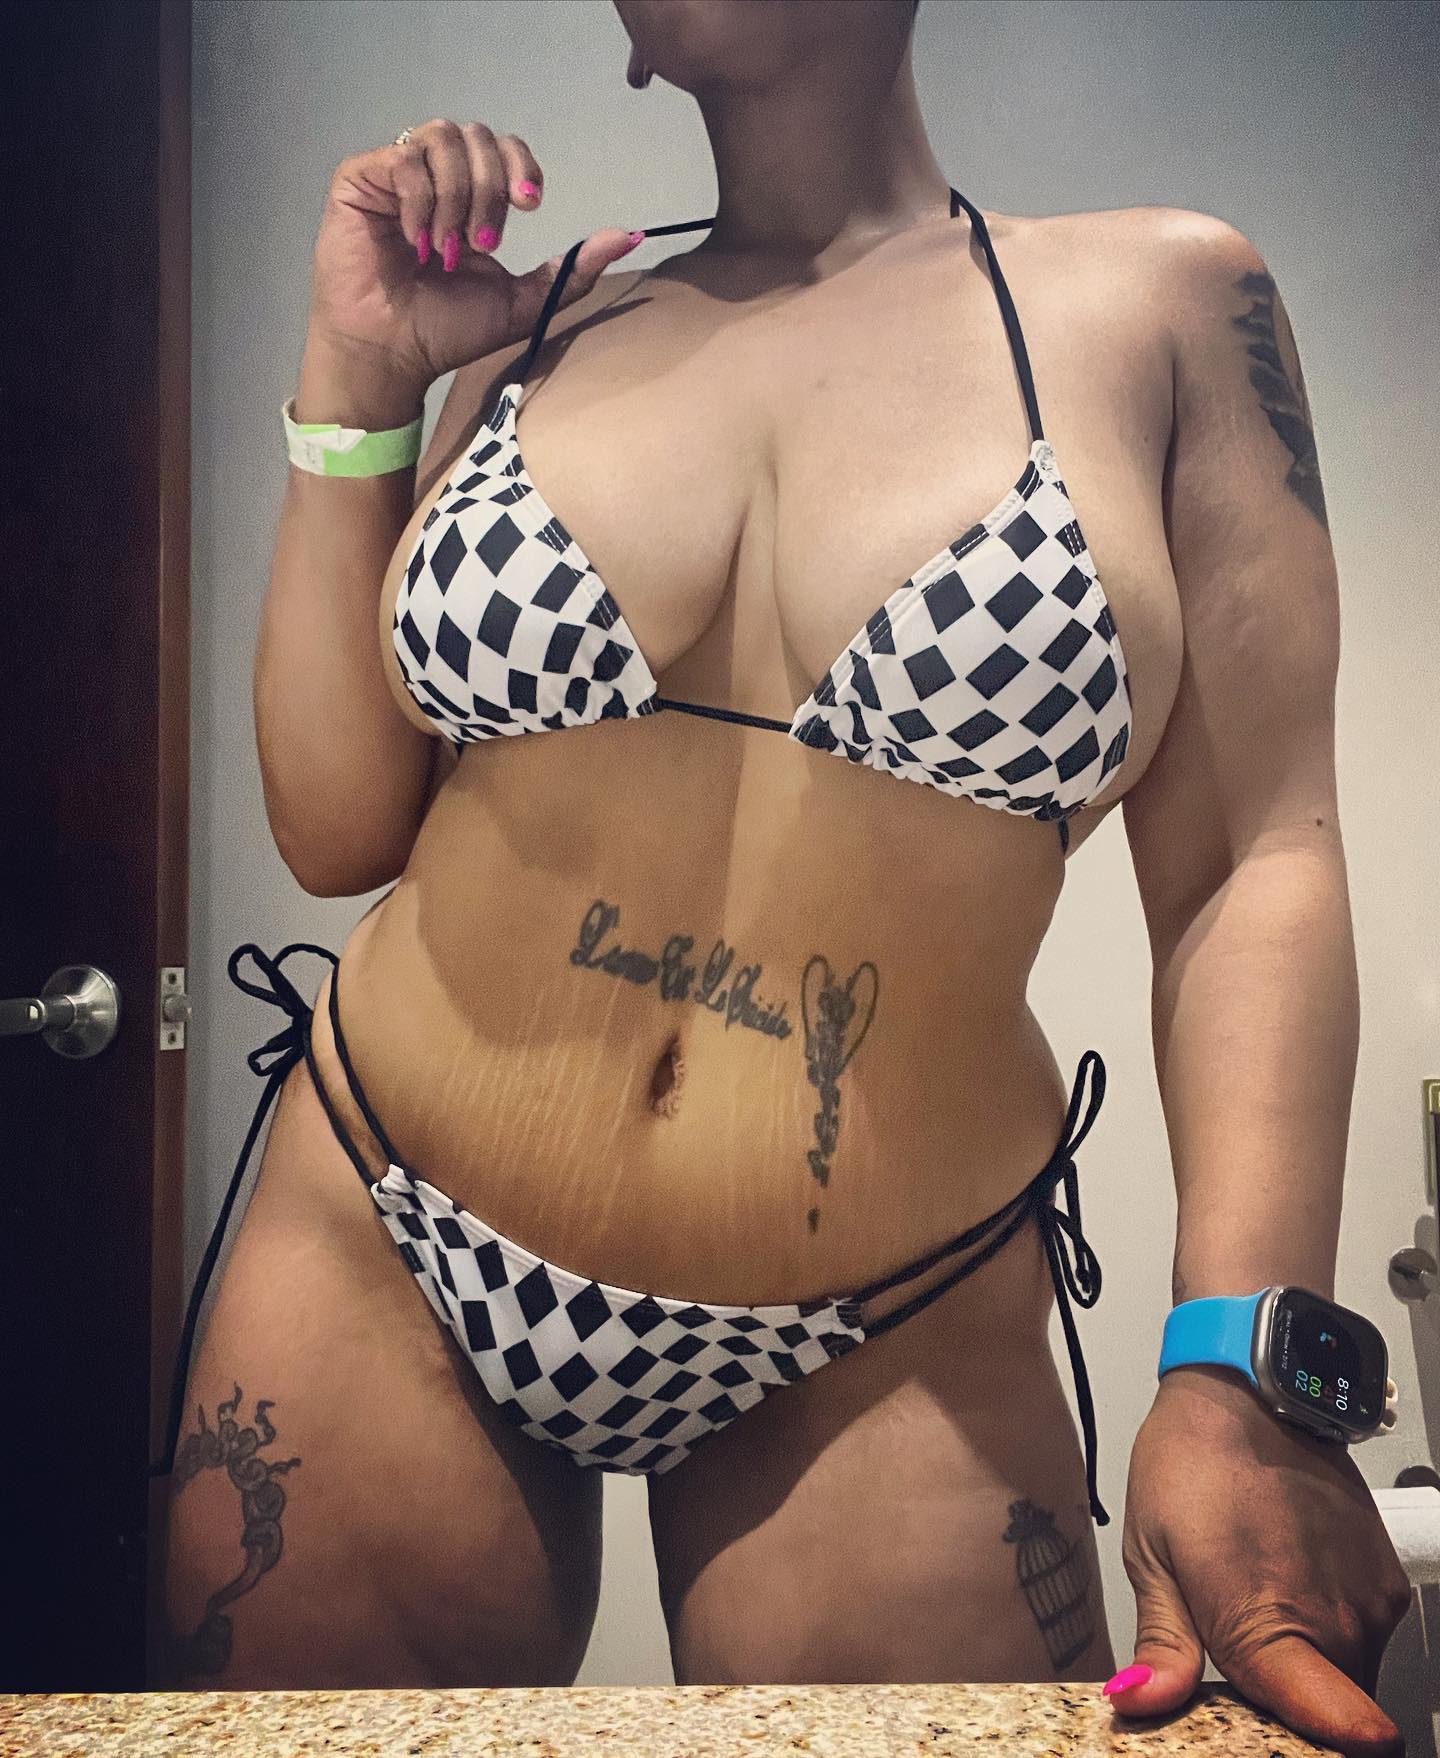 My attempt to brighten your day ☀️

#thick #thicc #thickandcurvy #thiccthighs #thiccgirls #thightattoo #thunderthighs #tattoo #tatt #tattooideas #tatted #tattedup #inktattoo #inked #inkedgirl #inkedgirls #alt #altgirl #alternative #emogirl #college #collegelife #shortgirls #slimthickwithyocuteass #slimthickgirls #freaknik #mixedgirl #racegirl #tan #racecar